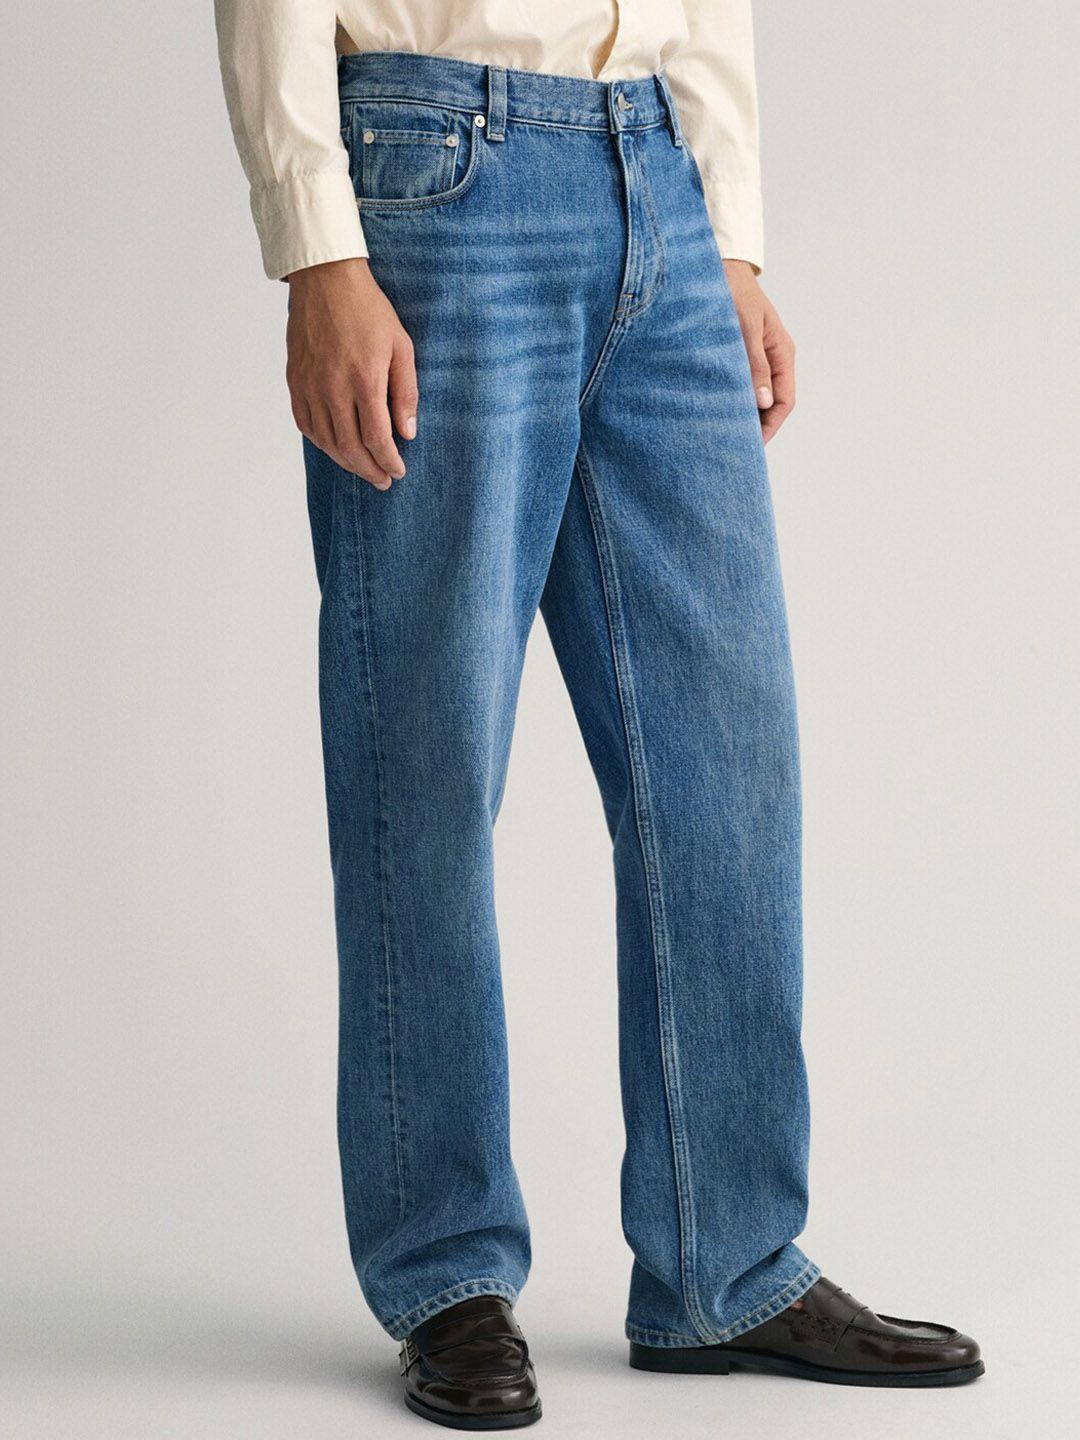 gant-men-relaxed-fit-light-fade-cotton-jeans